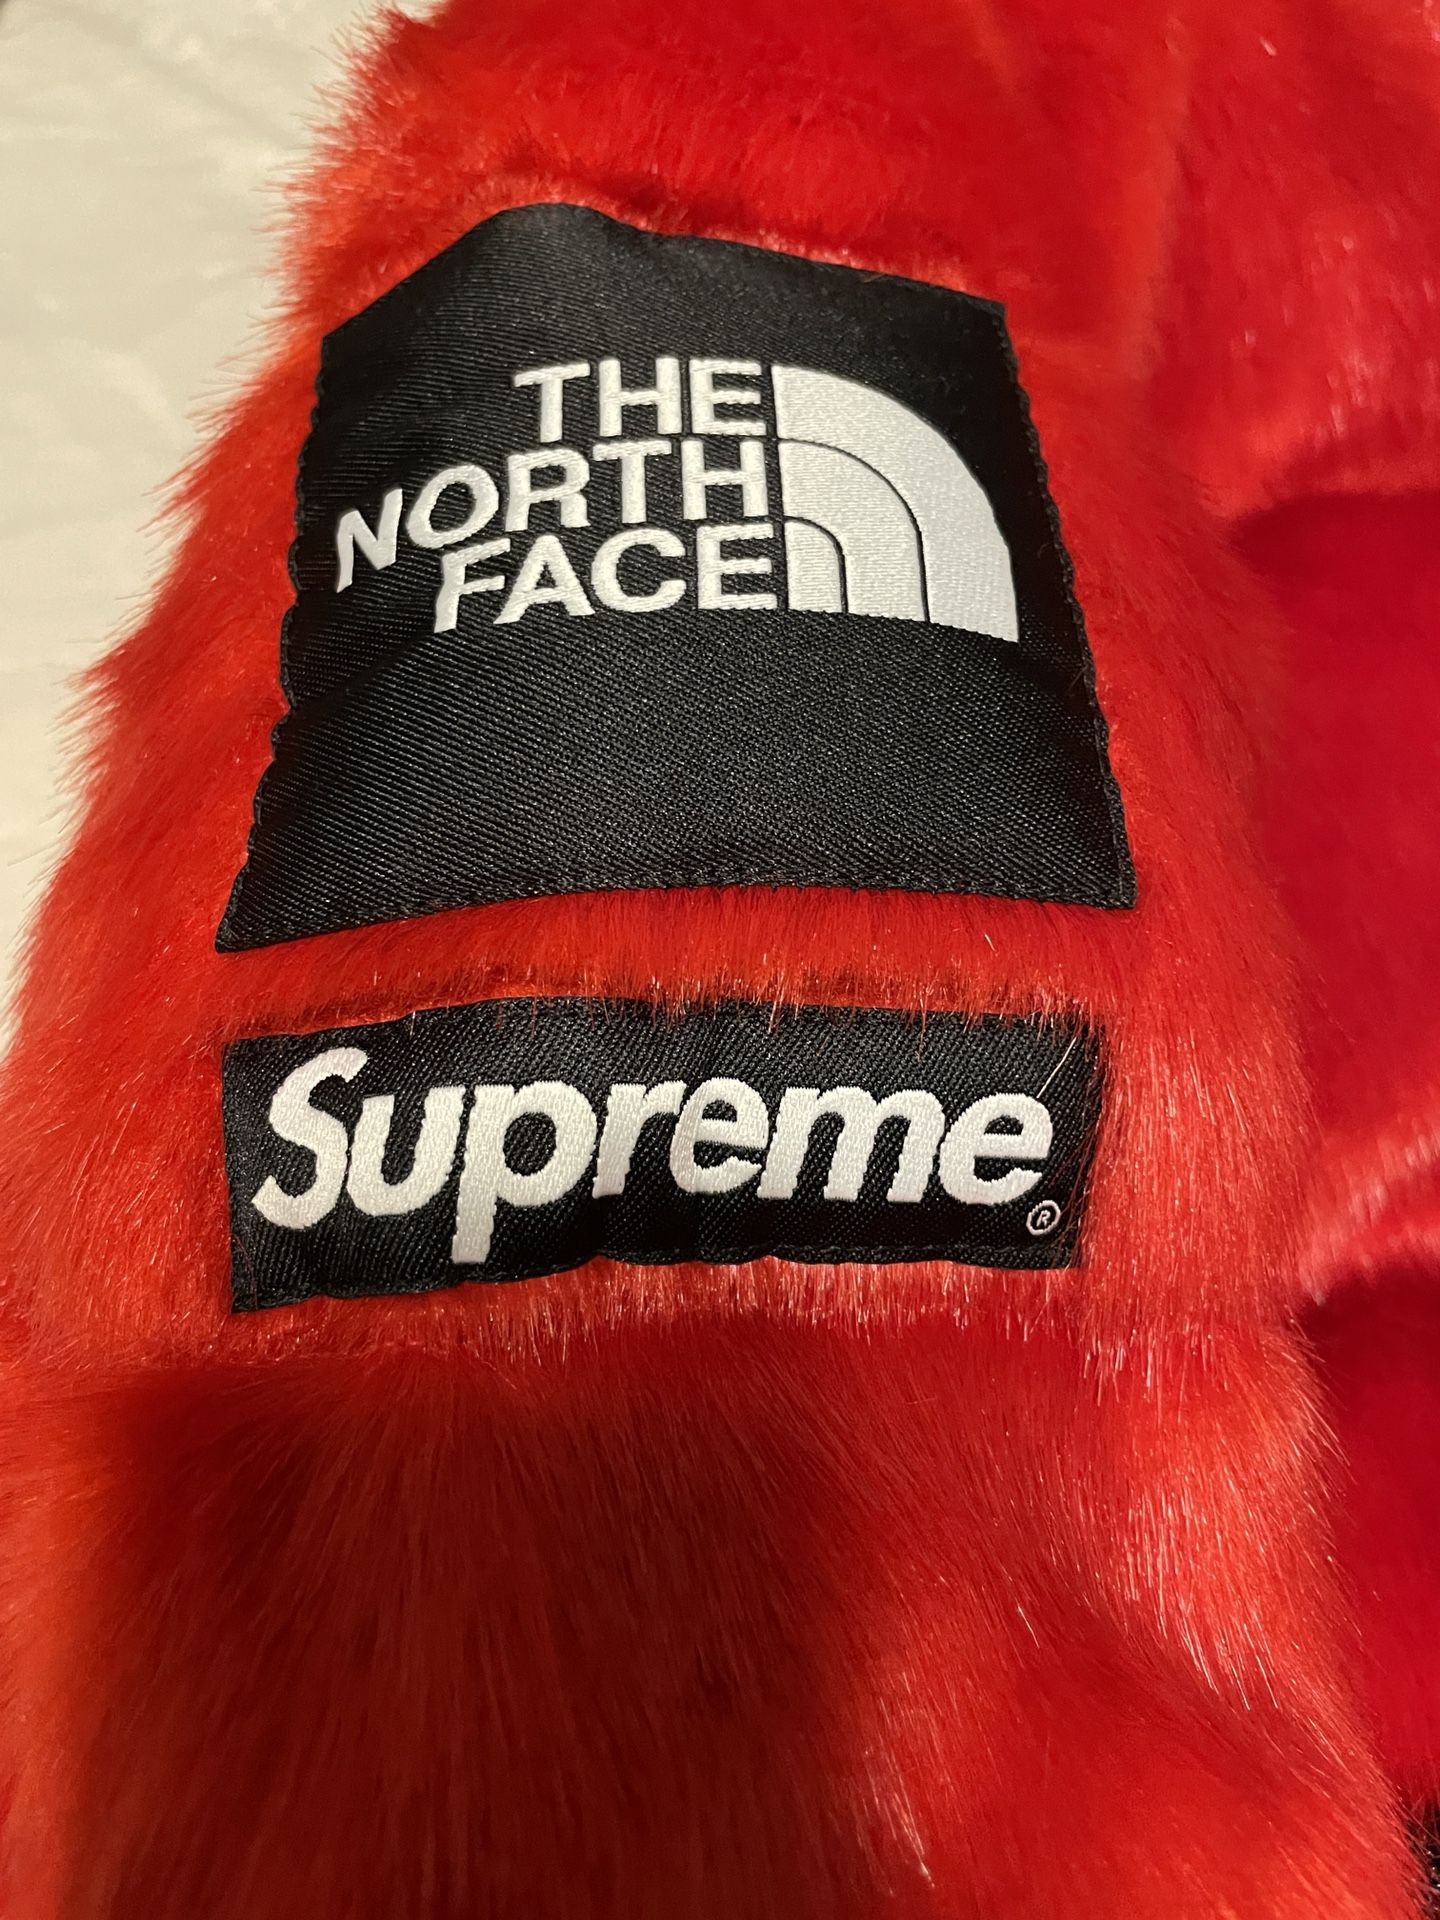 SUPREME x THE NORTH FACE RED FURRY WINTER JACKET 